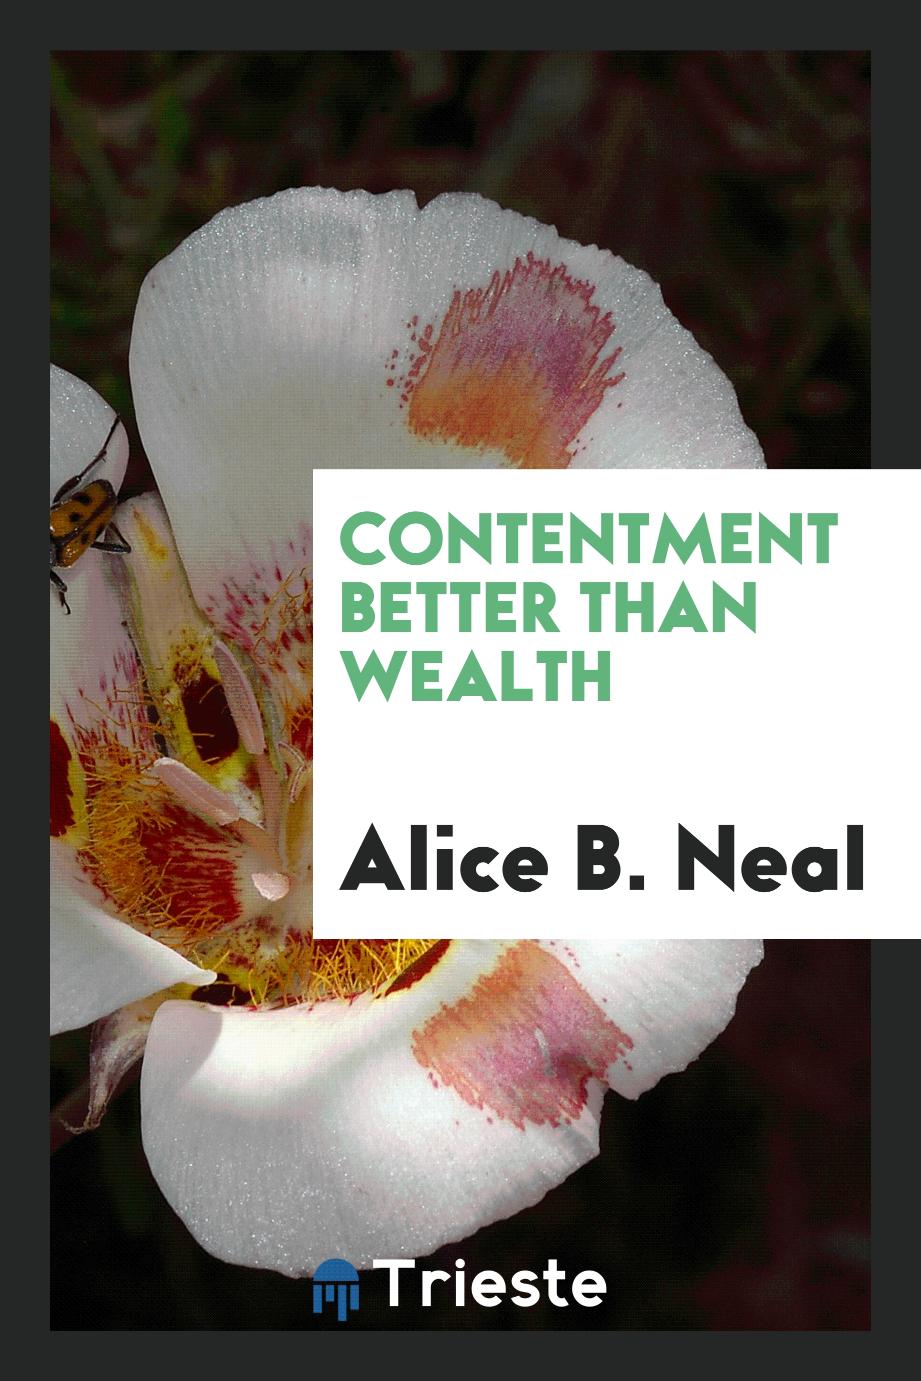 Contentment Better than Wealth